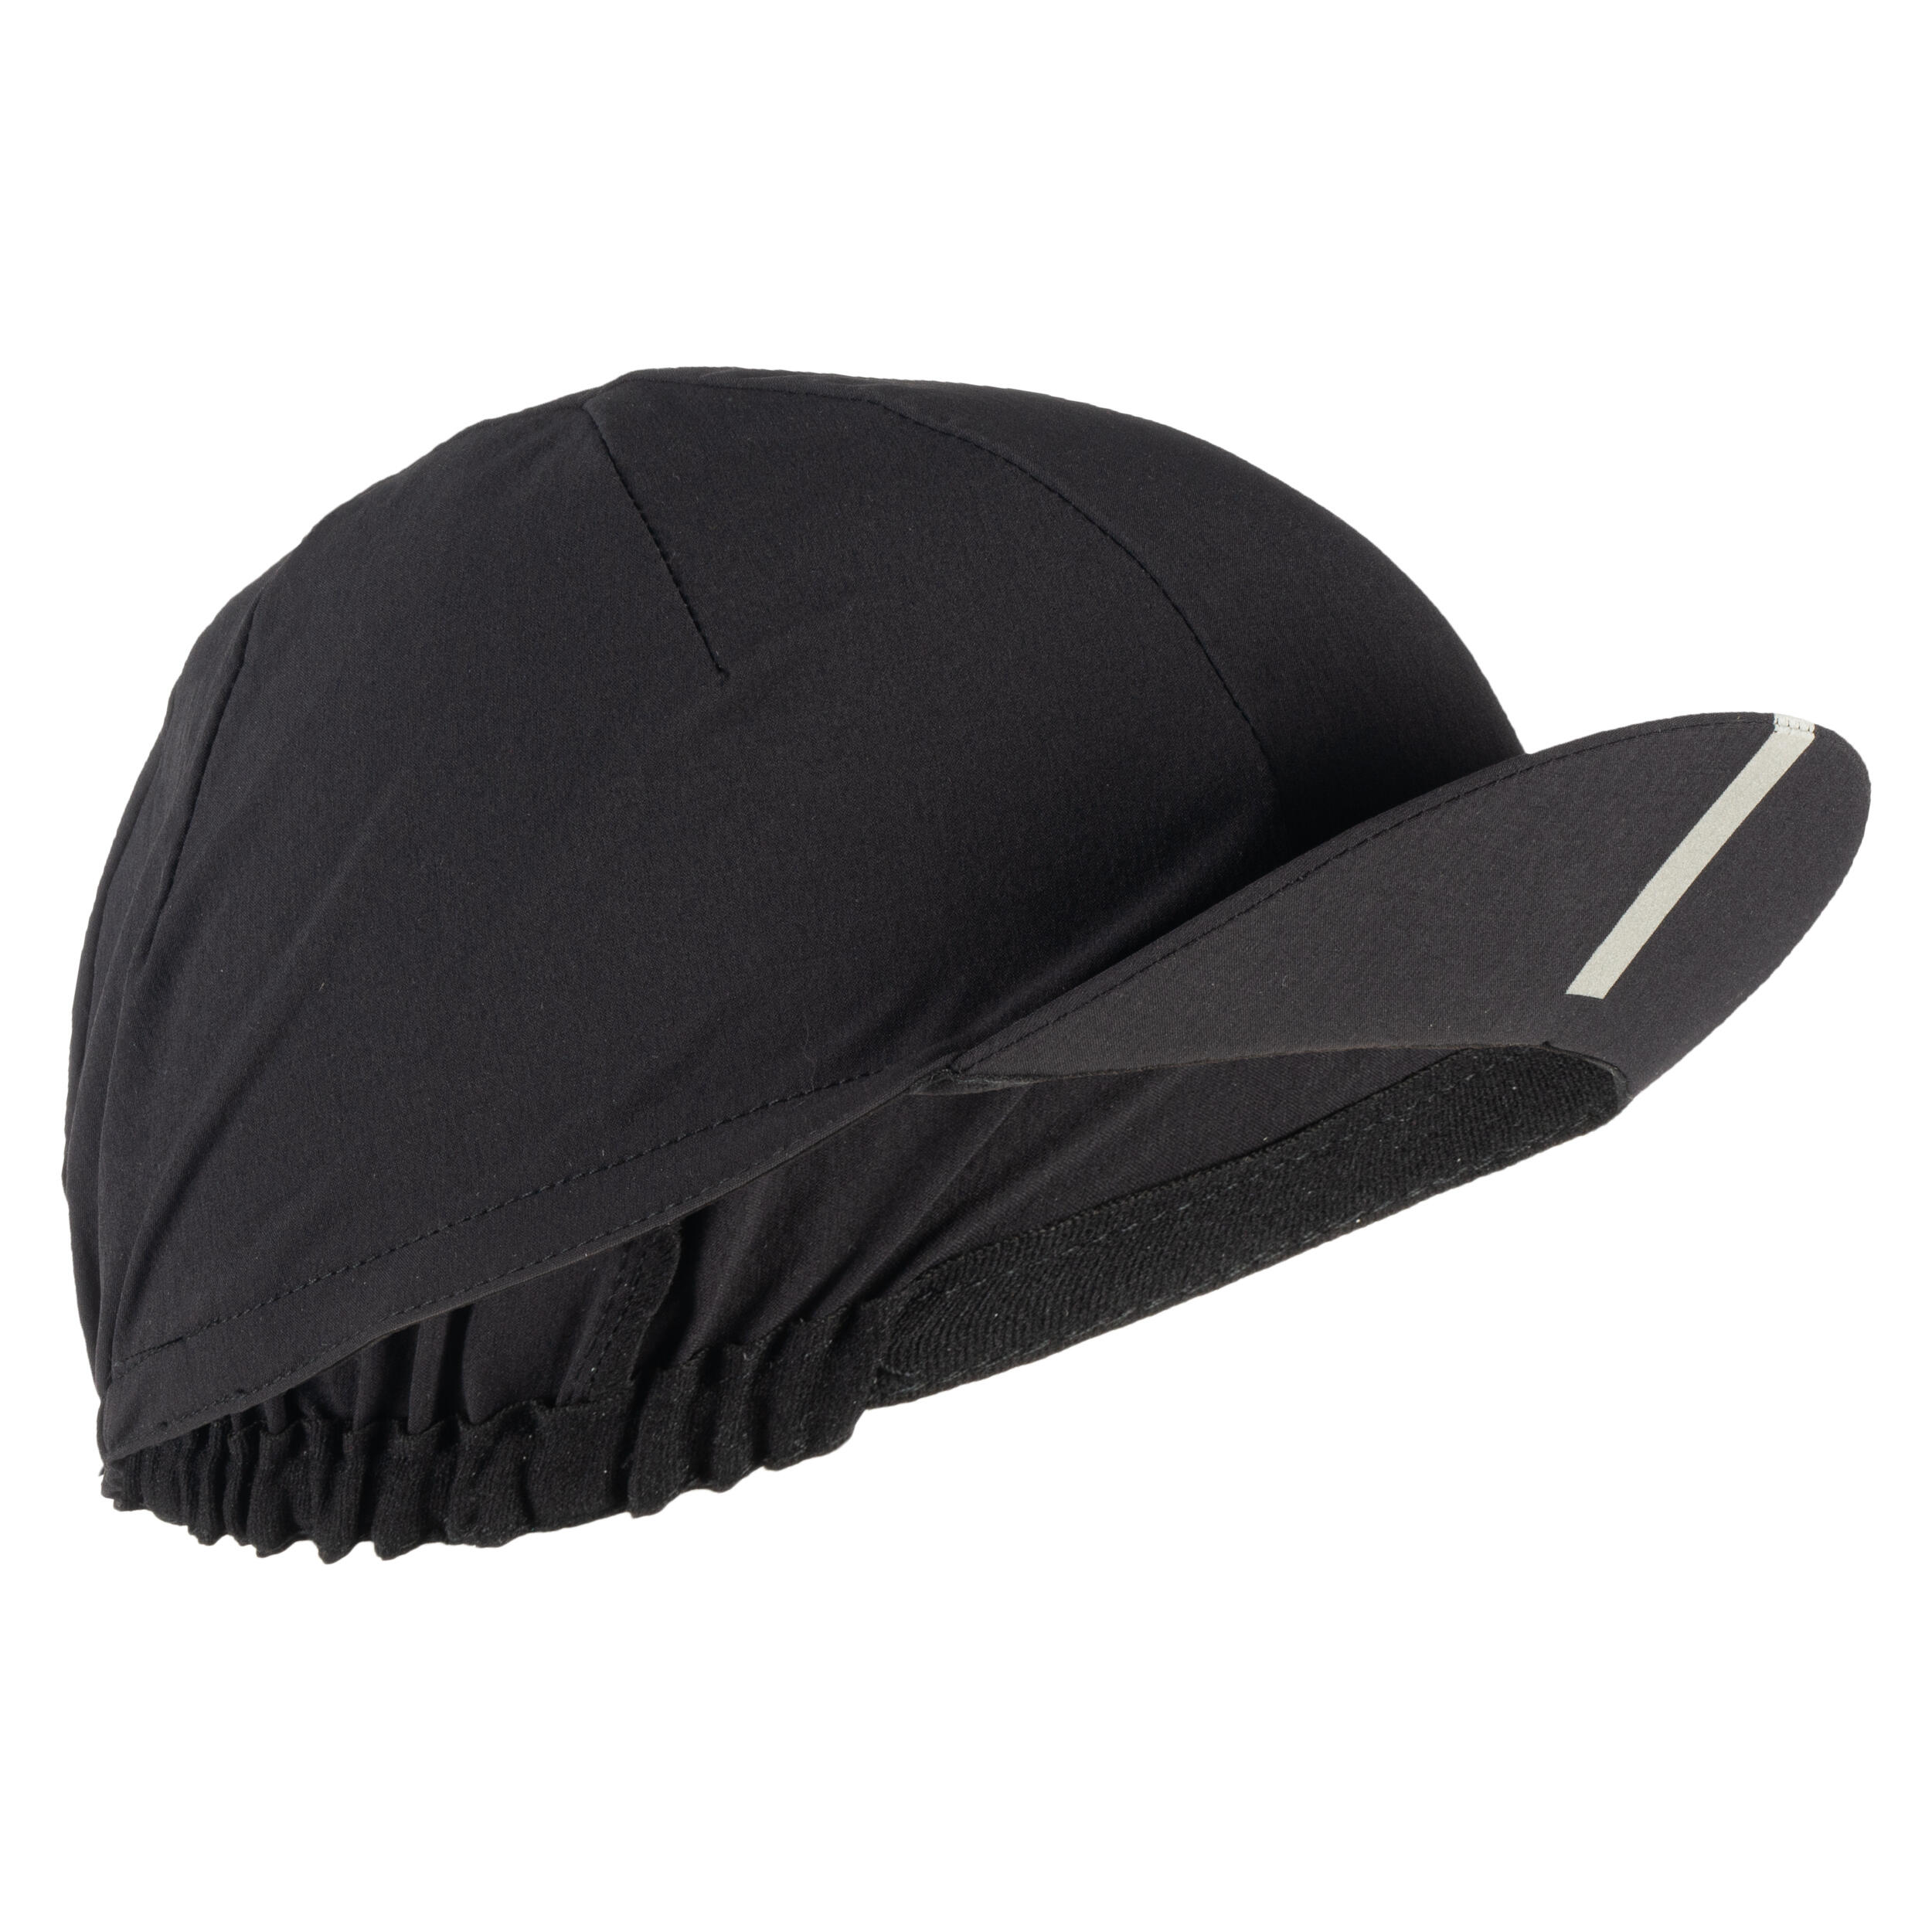 Cycling Caps and Headwear